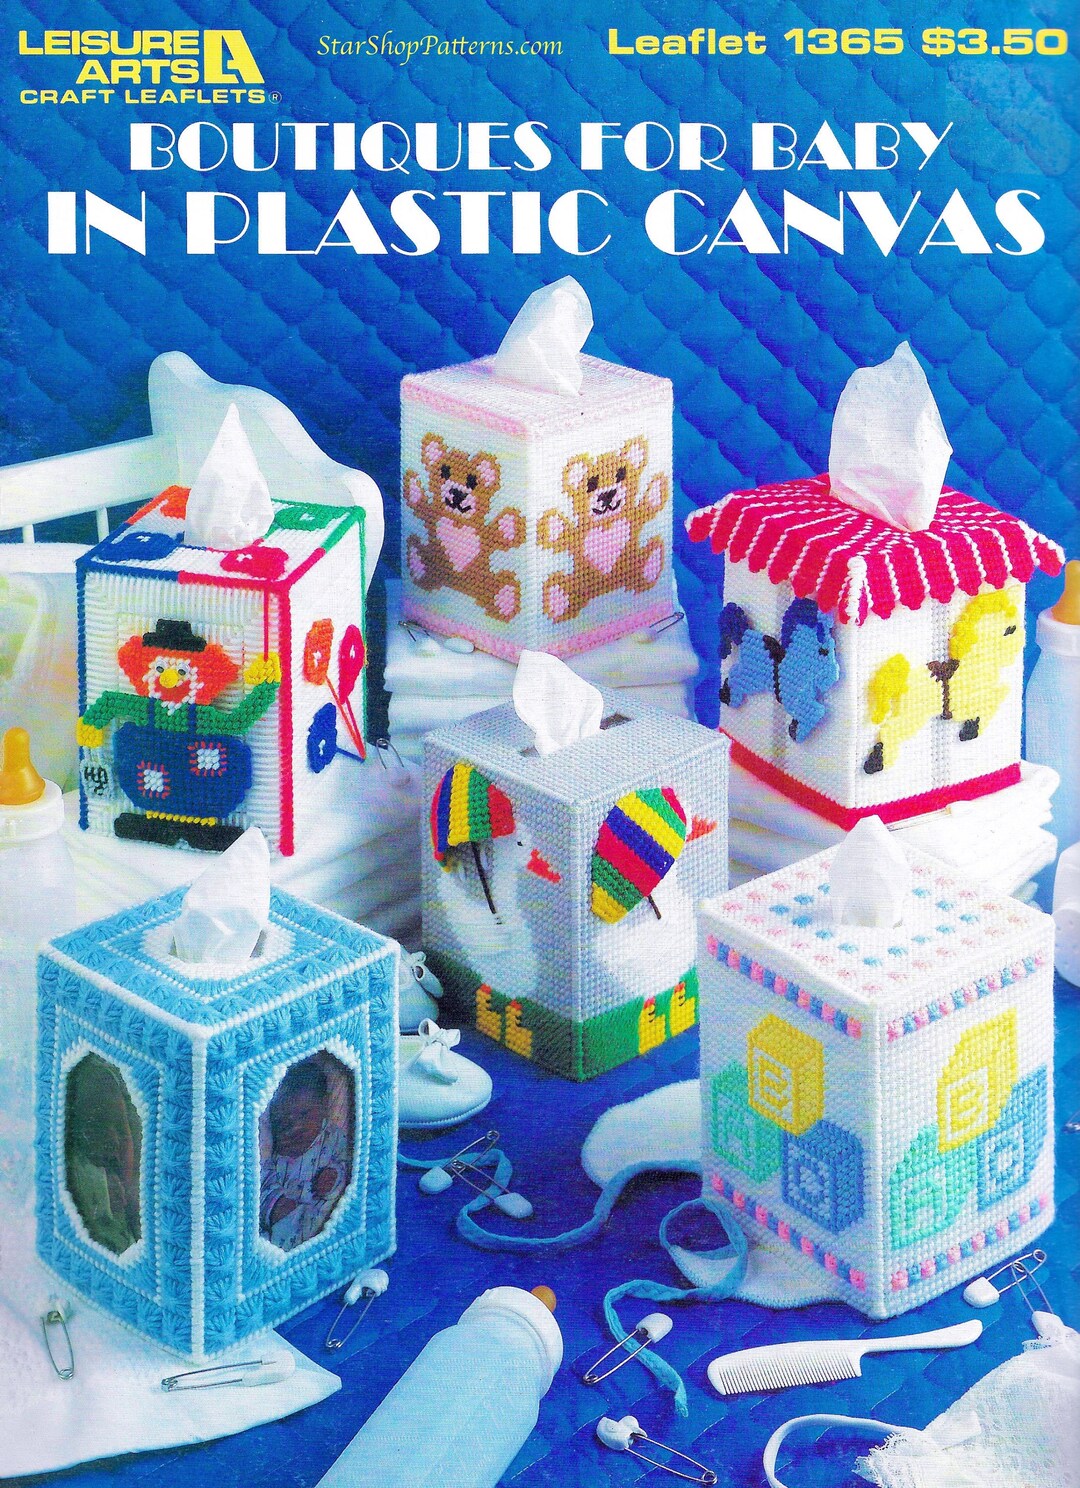 Designing Your Own Plastic Canvas Patterns Made Easy: 12 Blank